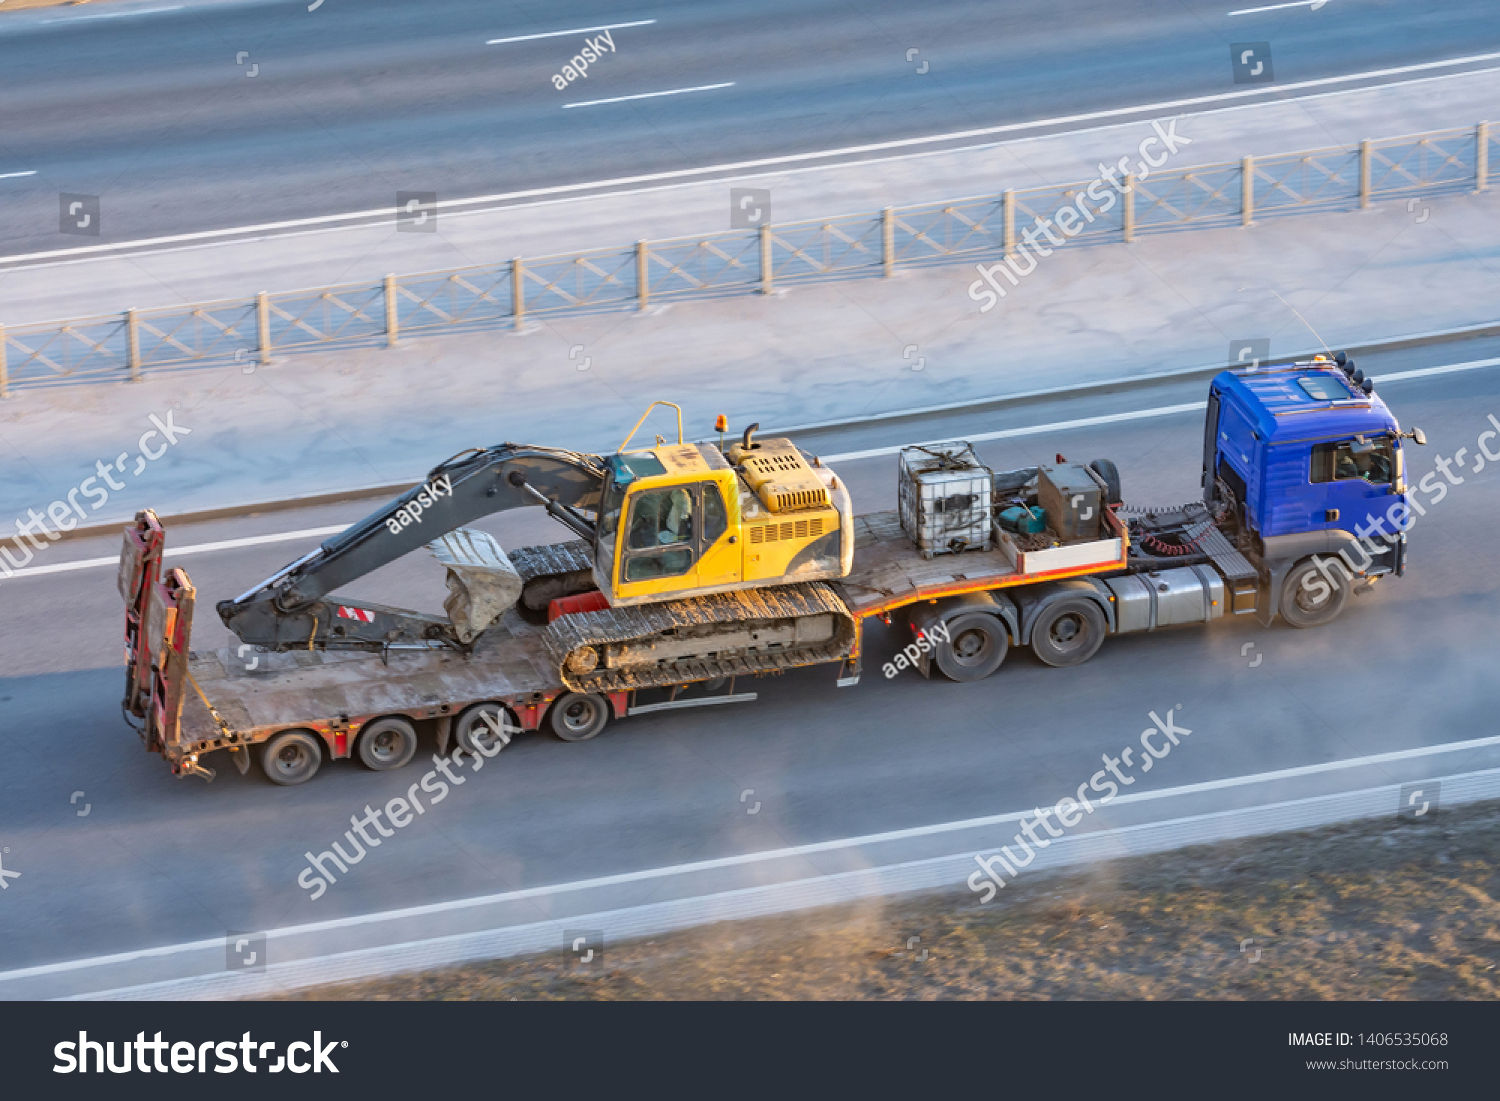 Truck with a long trailer platform for transporting heavy machinery, loaded crawler excavator with bucket. Highway transportation #1406535068